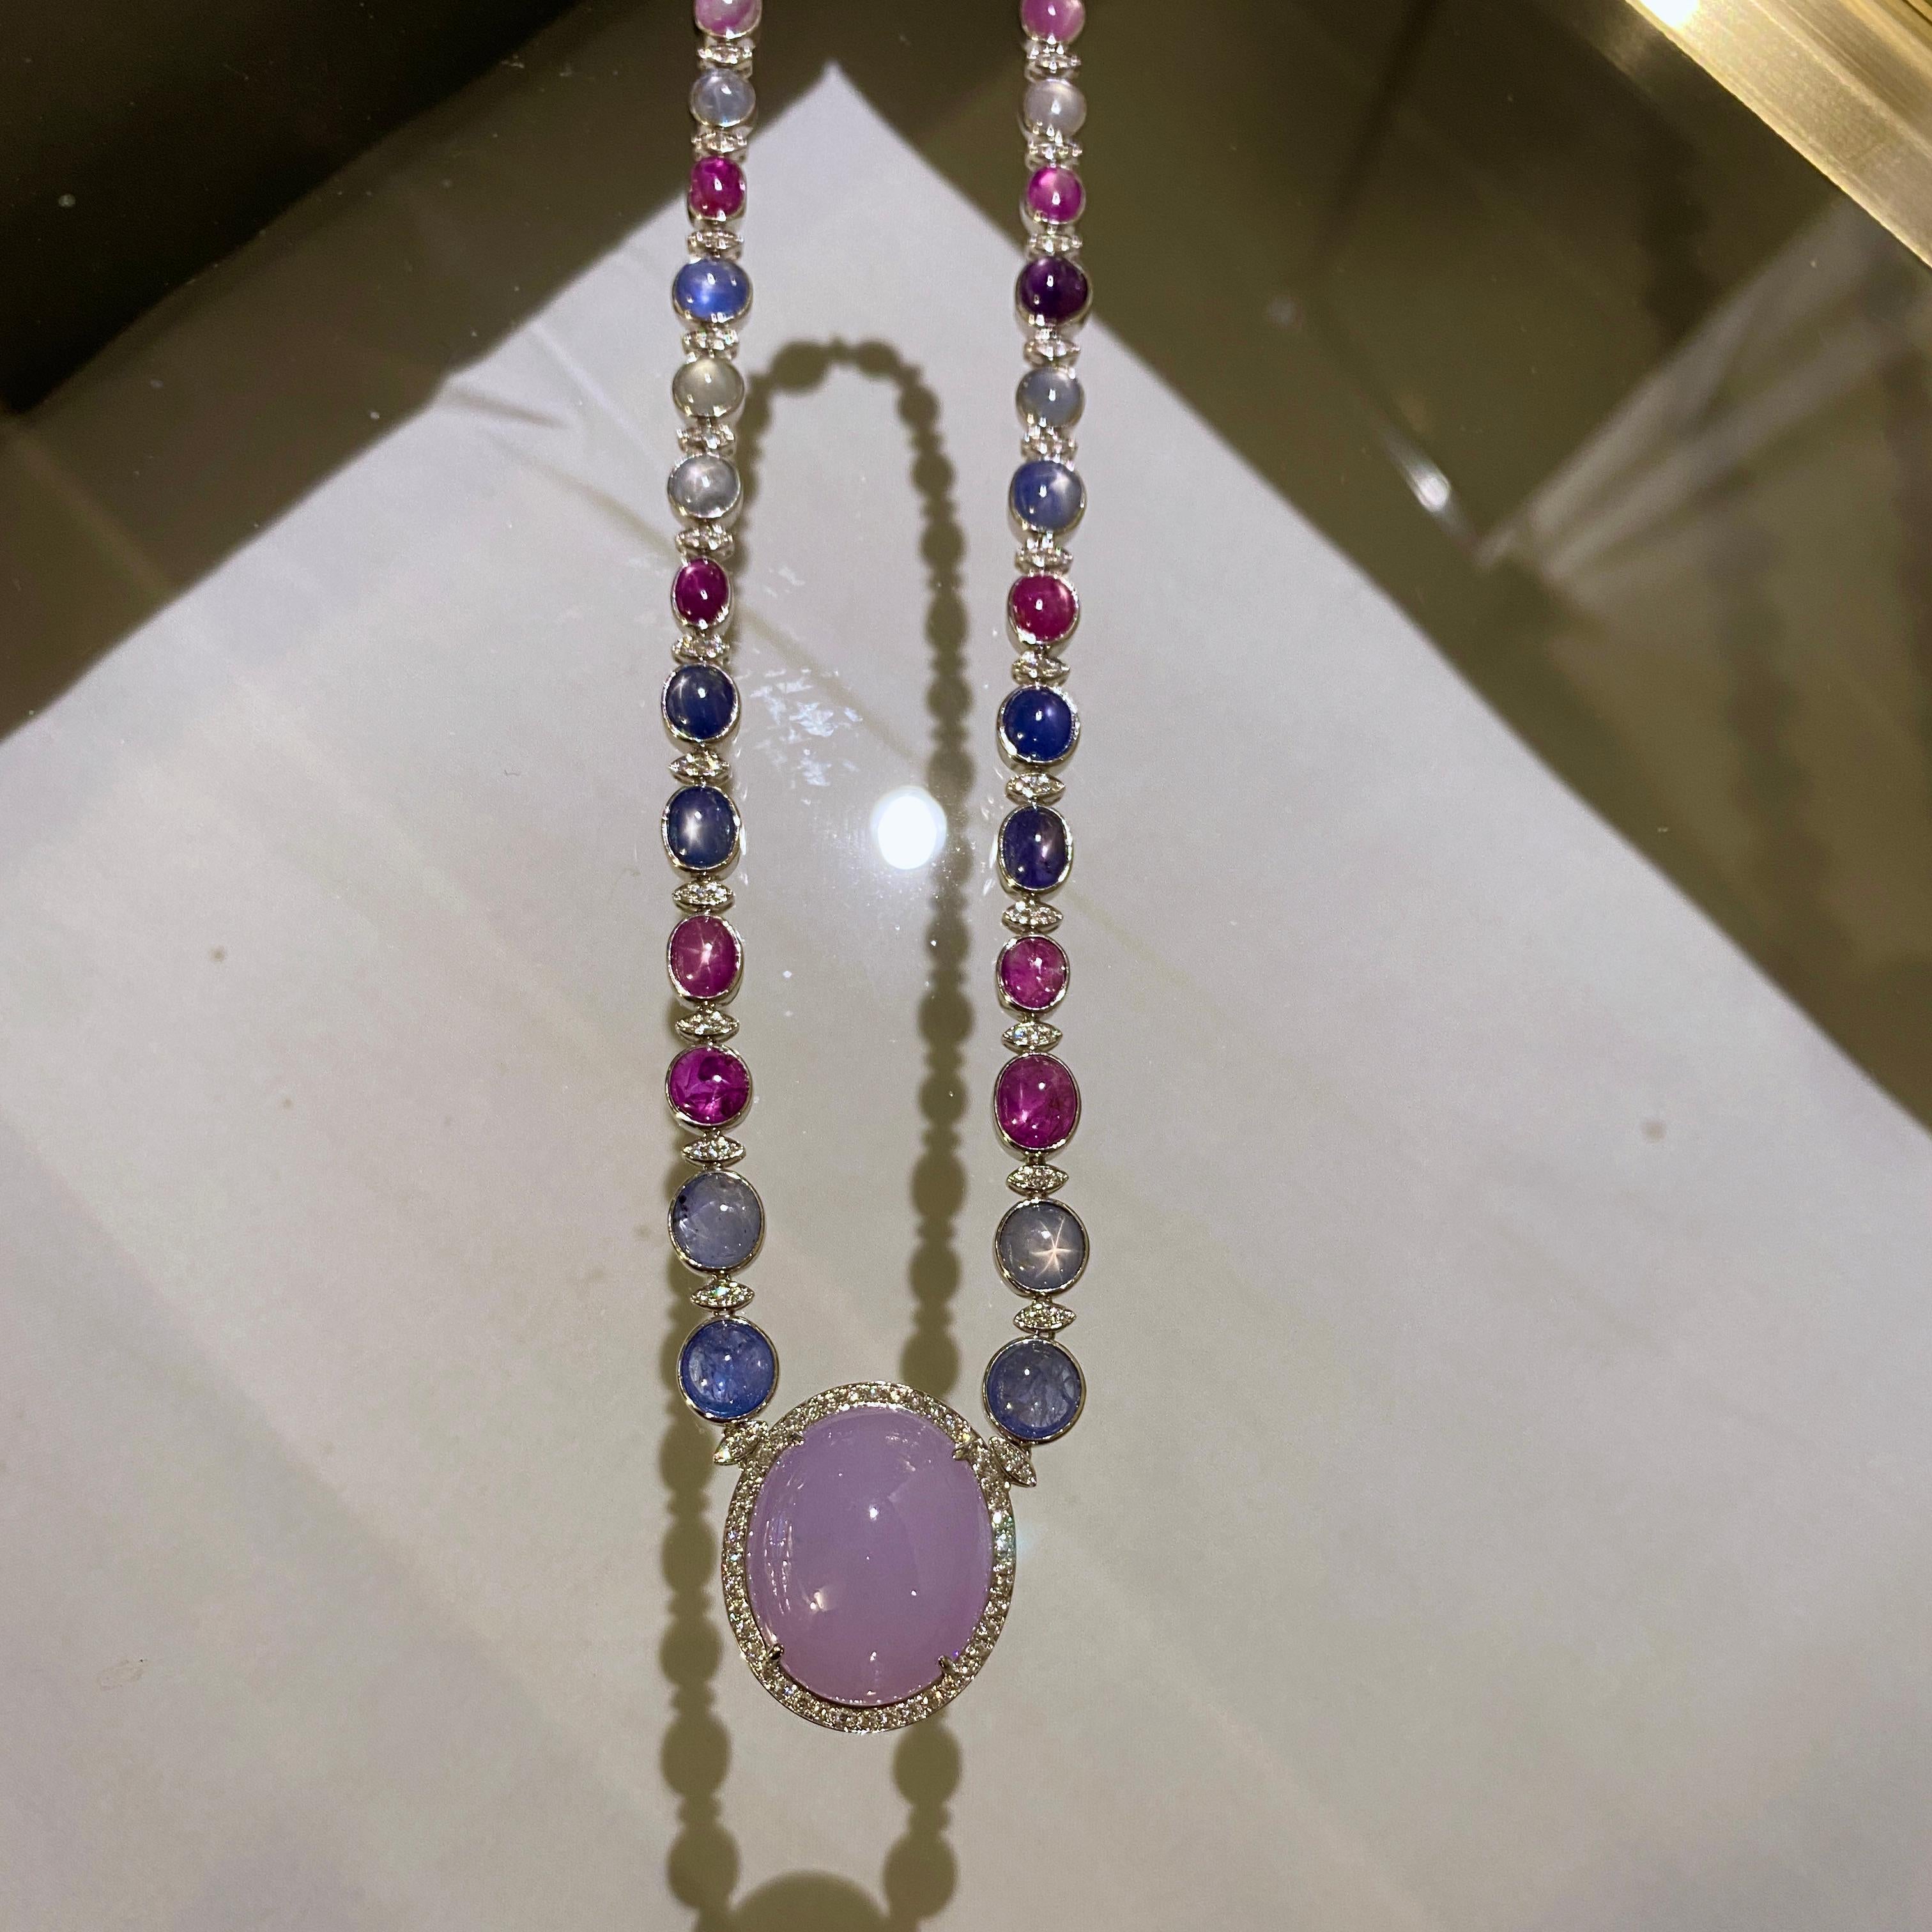 This is a big statement necklace comes with a whooping 55.36 ct of Star Sapphire and a massive Type A Lavender Jadeite Cabochon. The Jadeite is surrounded by diamond pave and then connected to the Star Sapphire necklace. The Star Sapphire on the